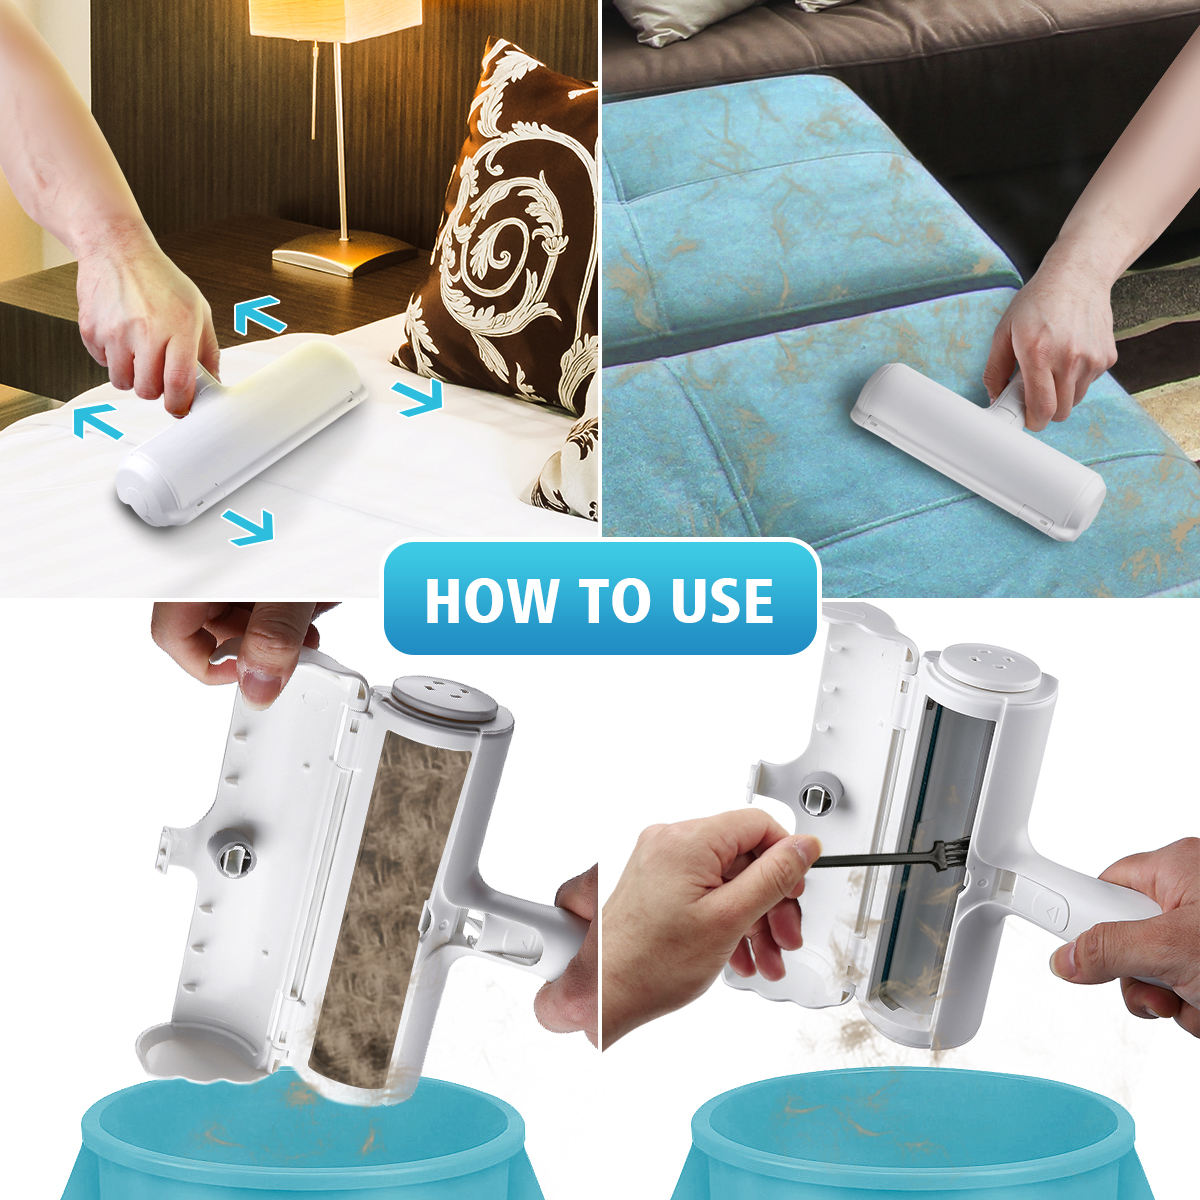 Pet-Hair-Remover-Roller-Self-Cleaning-Dog-Reusabl-Cat-Hair-Remover-Fur-Clothes-Lint-Remover-Roller-1622253